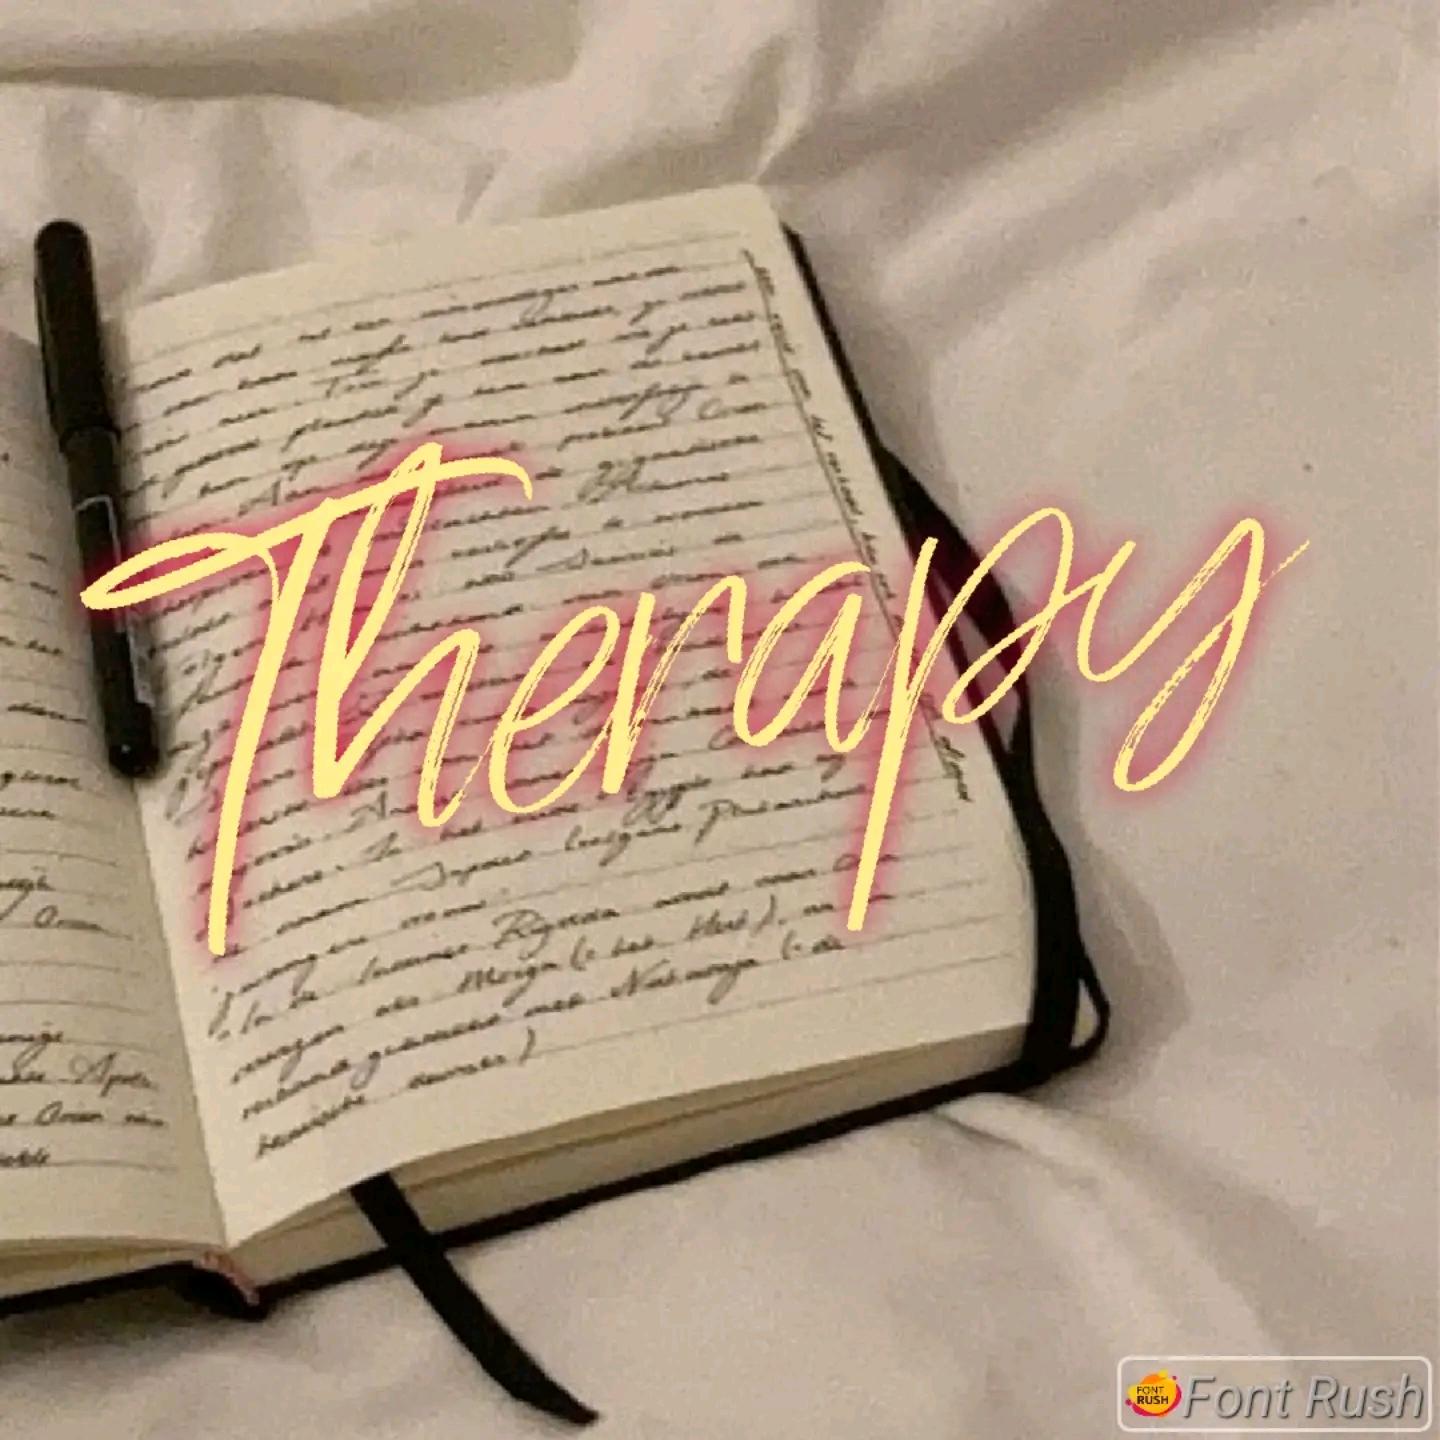 Therapy (rehashed)